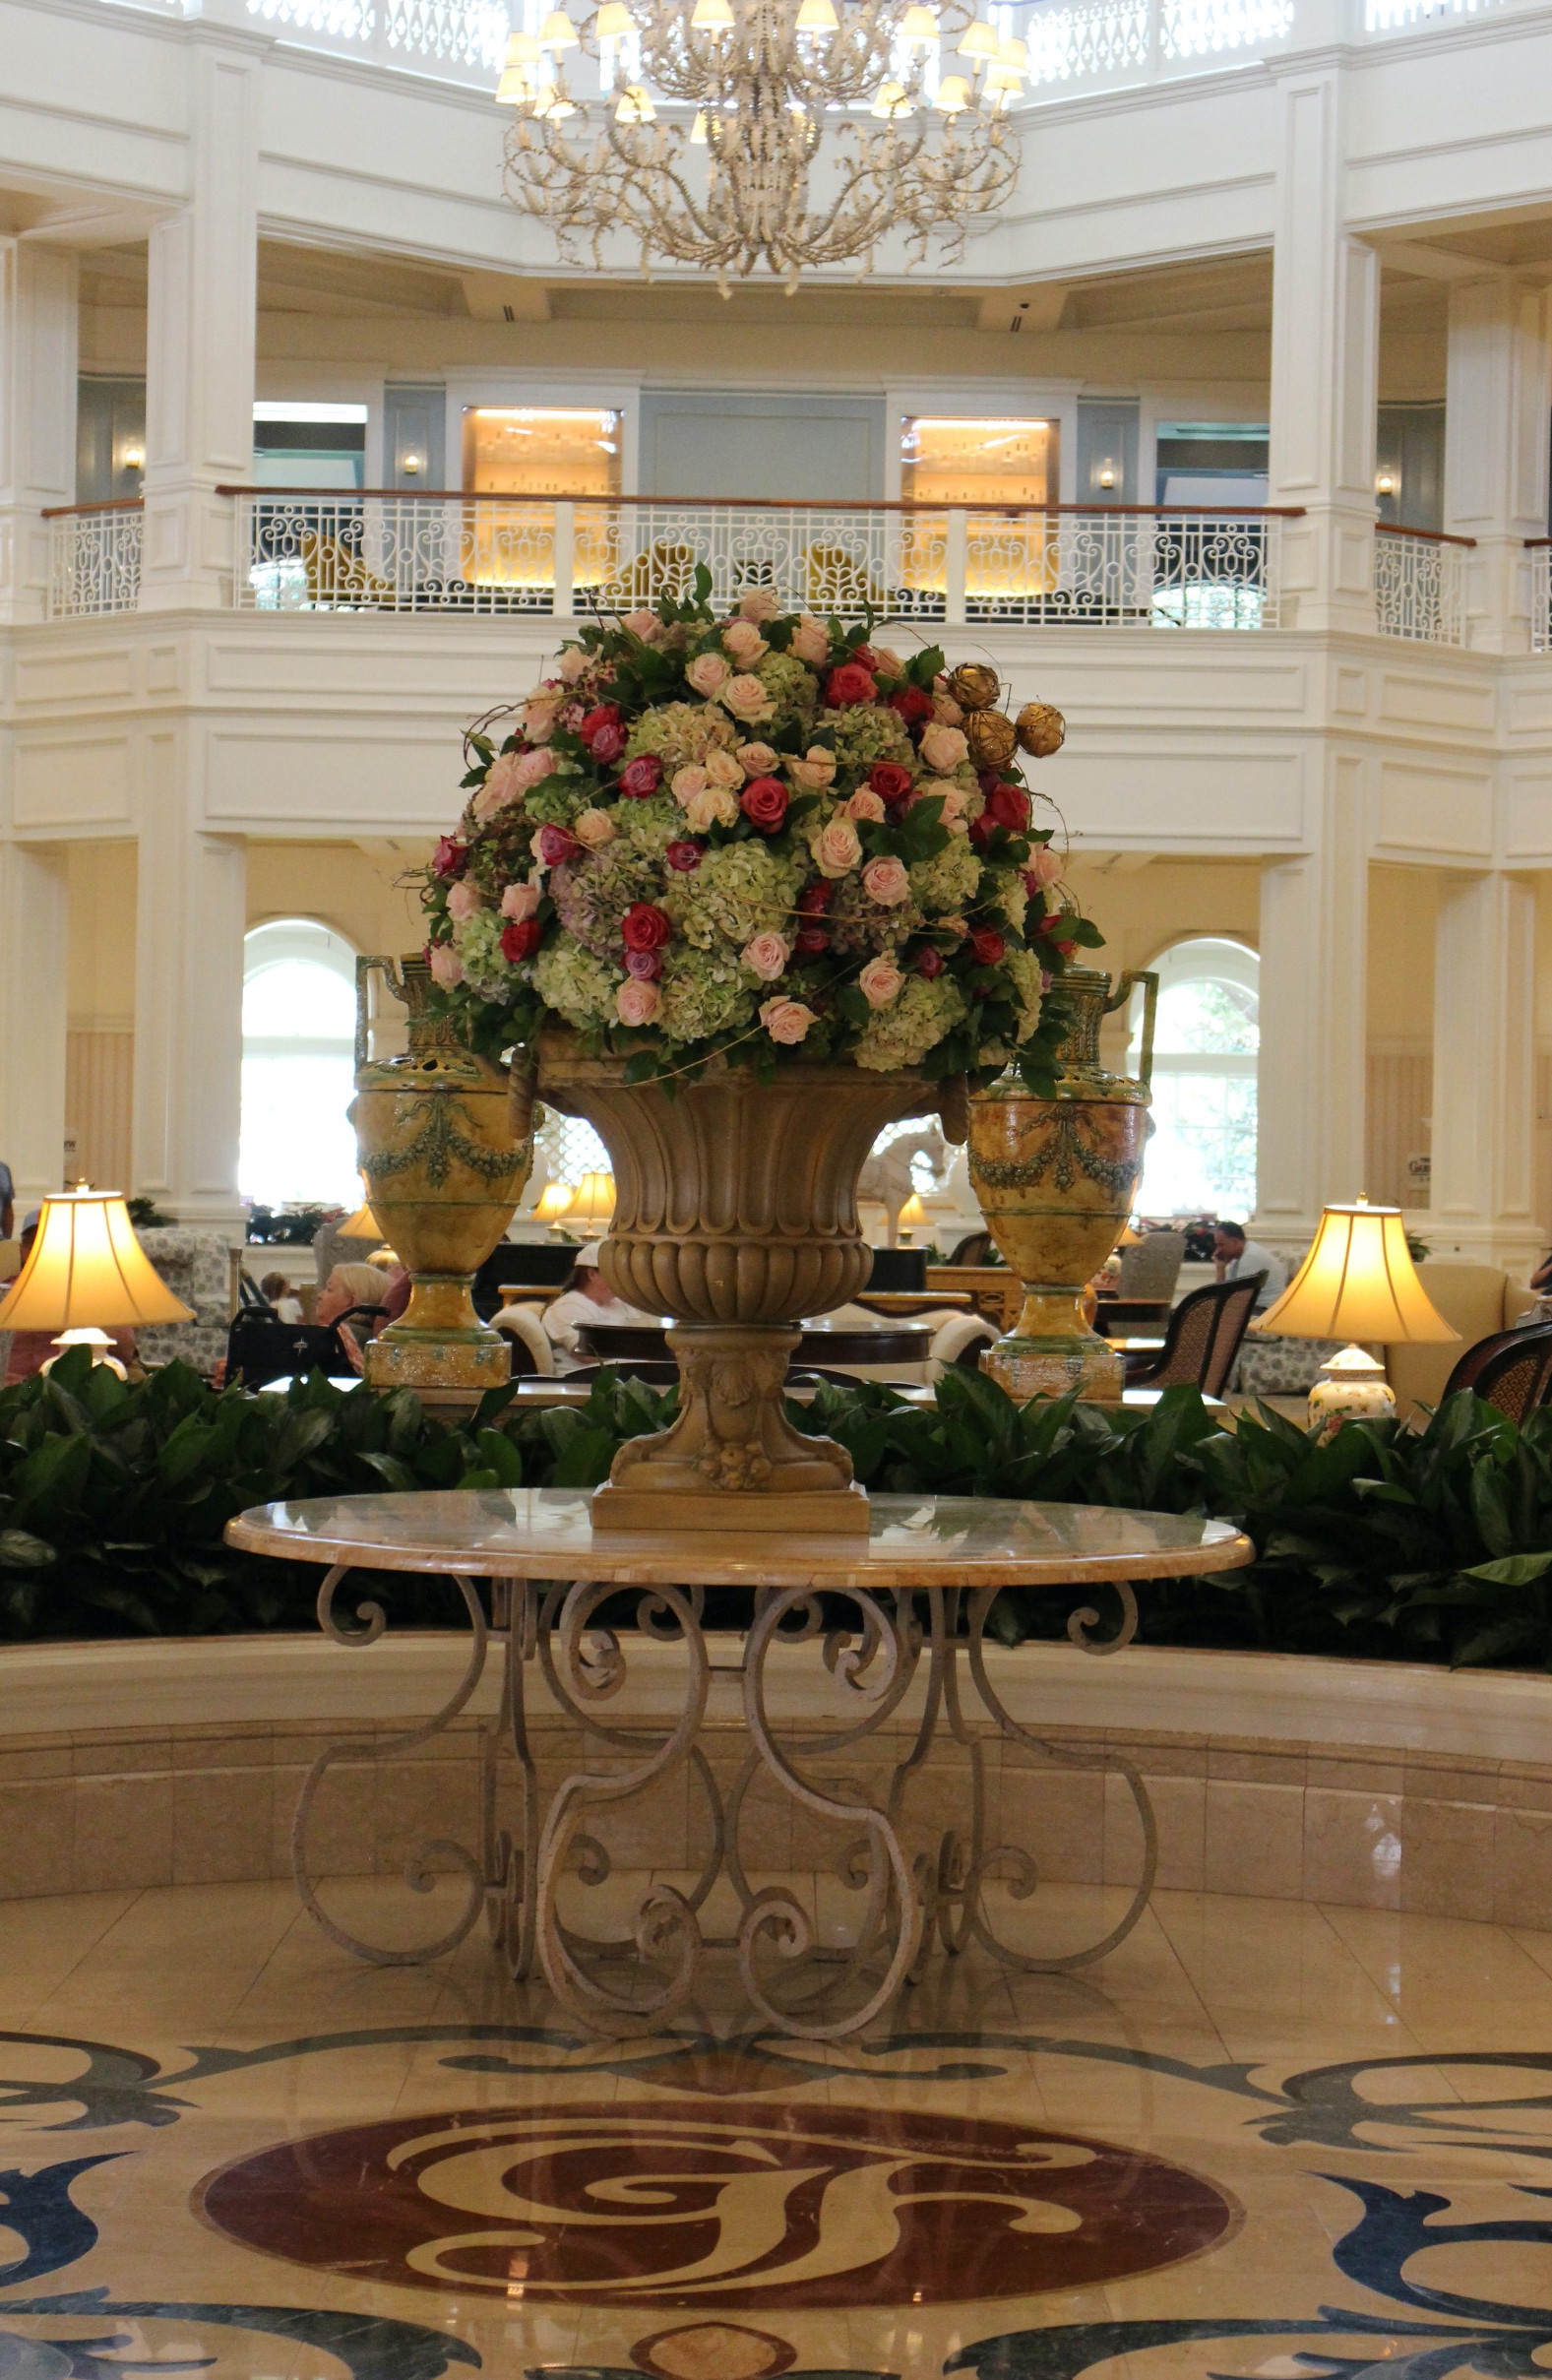 A large vase of roses and hydrangeas sits on a table at the entrance of the Grand Floridian lobby.